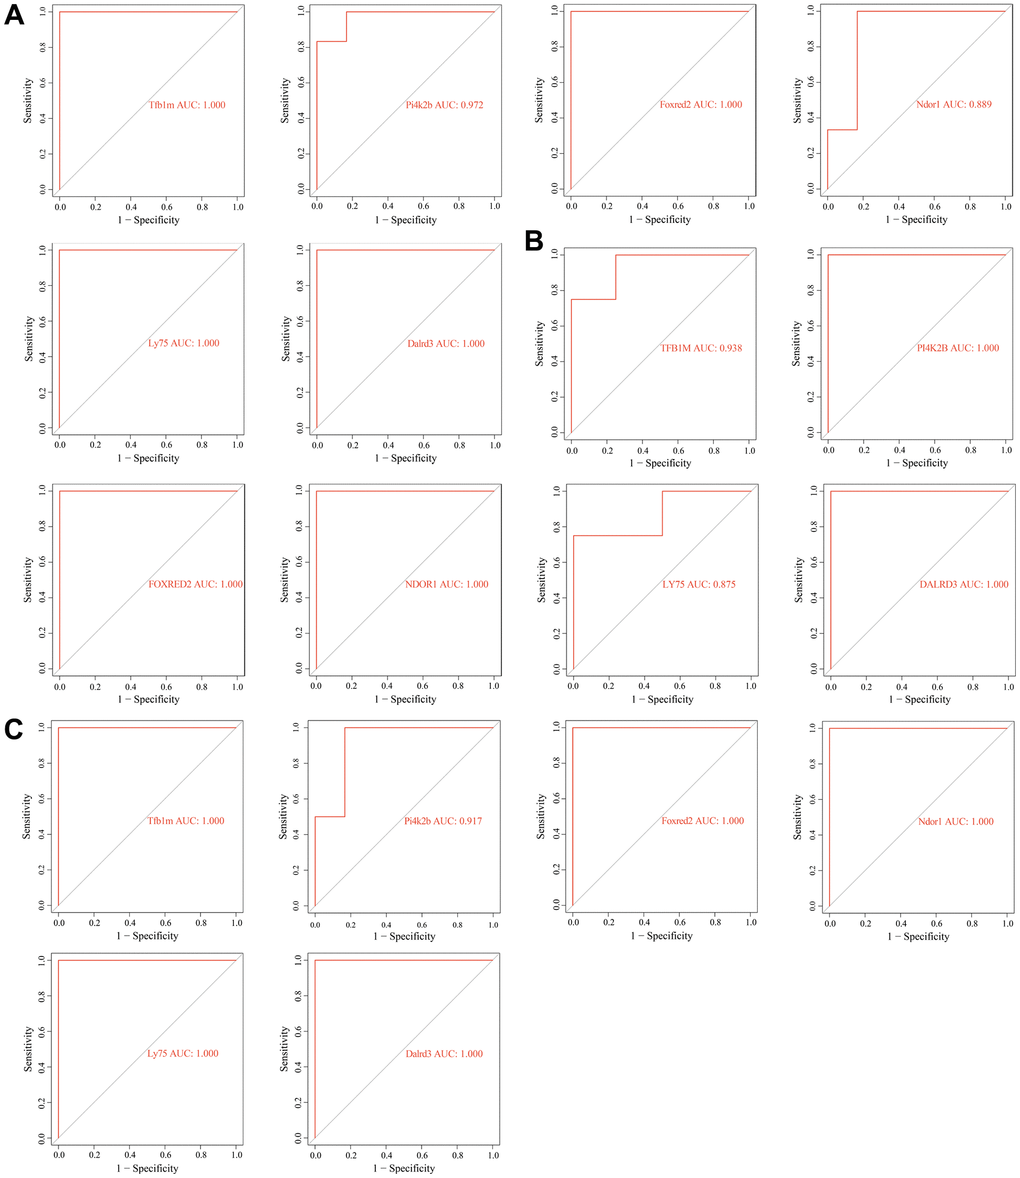 Receiver operating characteristic (ROC) analysis of key genes related to diabetic vascular aging. (A) ROC curves of Tfb1m1, Pi4k2b, Foxred2, Ndor1, Ly75 and Dalrd3 in GSE66280 dataset. (B) ROC curves of TFB1M1, PI4K2B, FOXRED2, NDOR1, LY75, DALRD3 in GSE171663 dataset. (C) ROC curves of Tfb1m1, Pi4k2b, Foxred2, Ndor1, Ly75 and Dalrd3 in the merged diabetic vasculopathy dataset (merged GSE121487 and GSE57329 datasets).